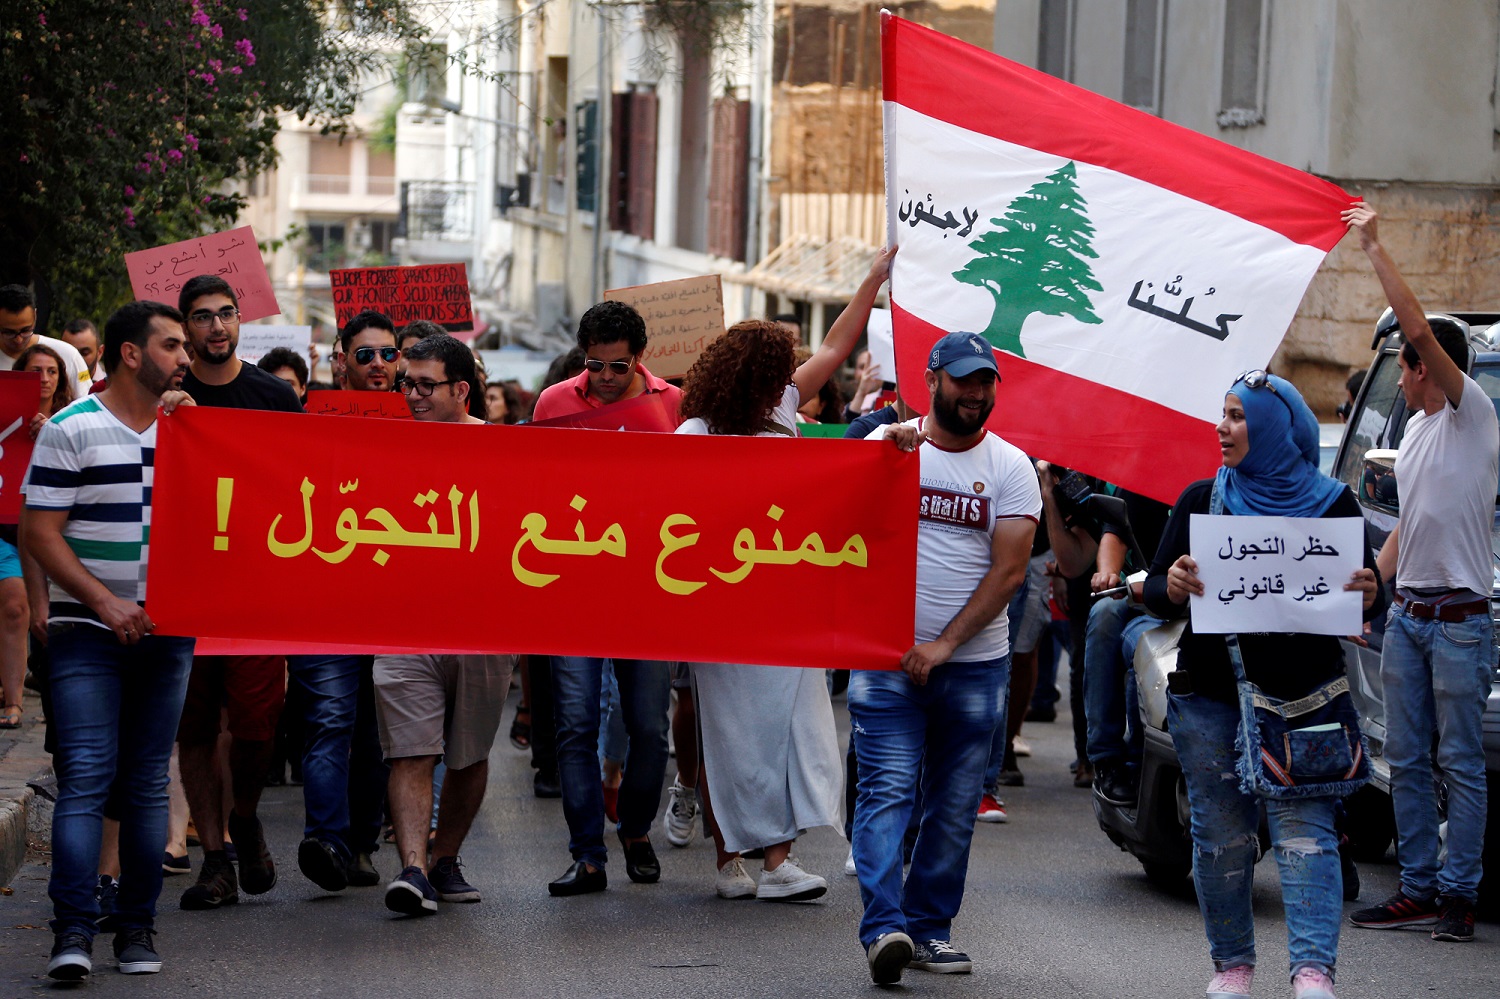 Lebanese people demonstrate in Beirut against laws imposing a curfew on Syrian refugees instituted by several municipalities in Lebanon. Photo: Mohamad Azakir – Reuters